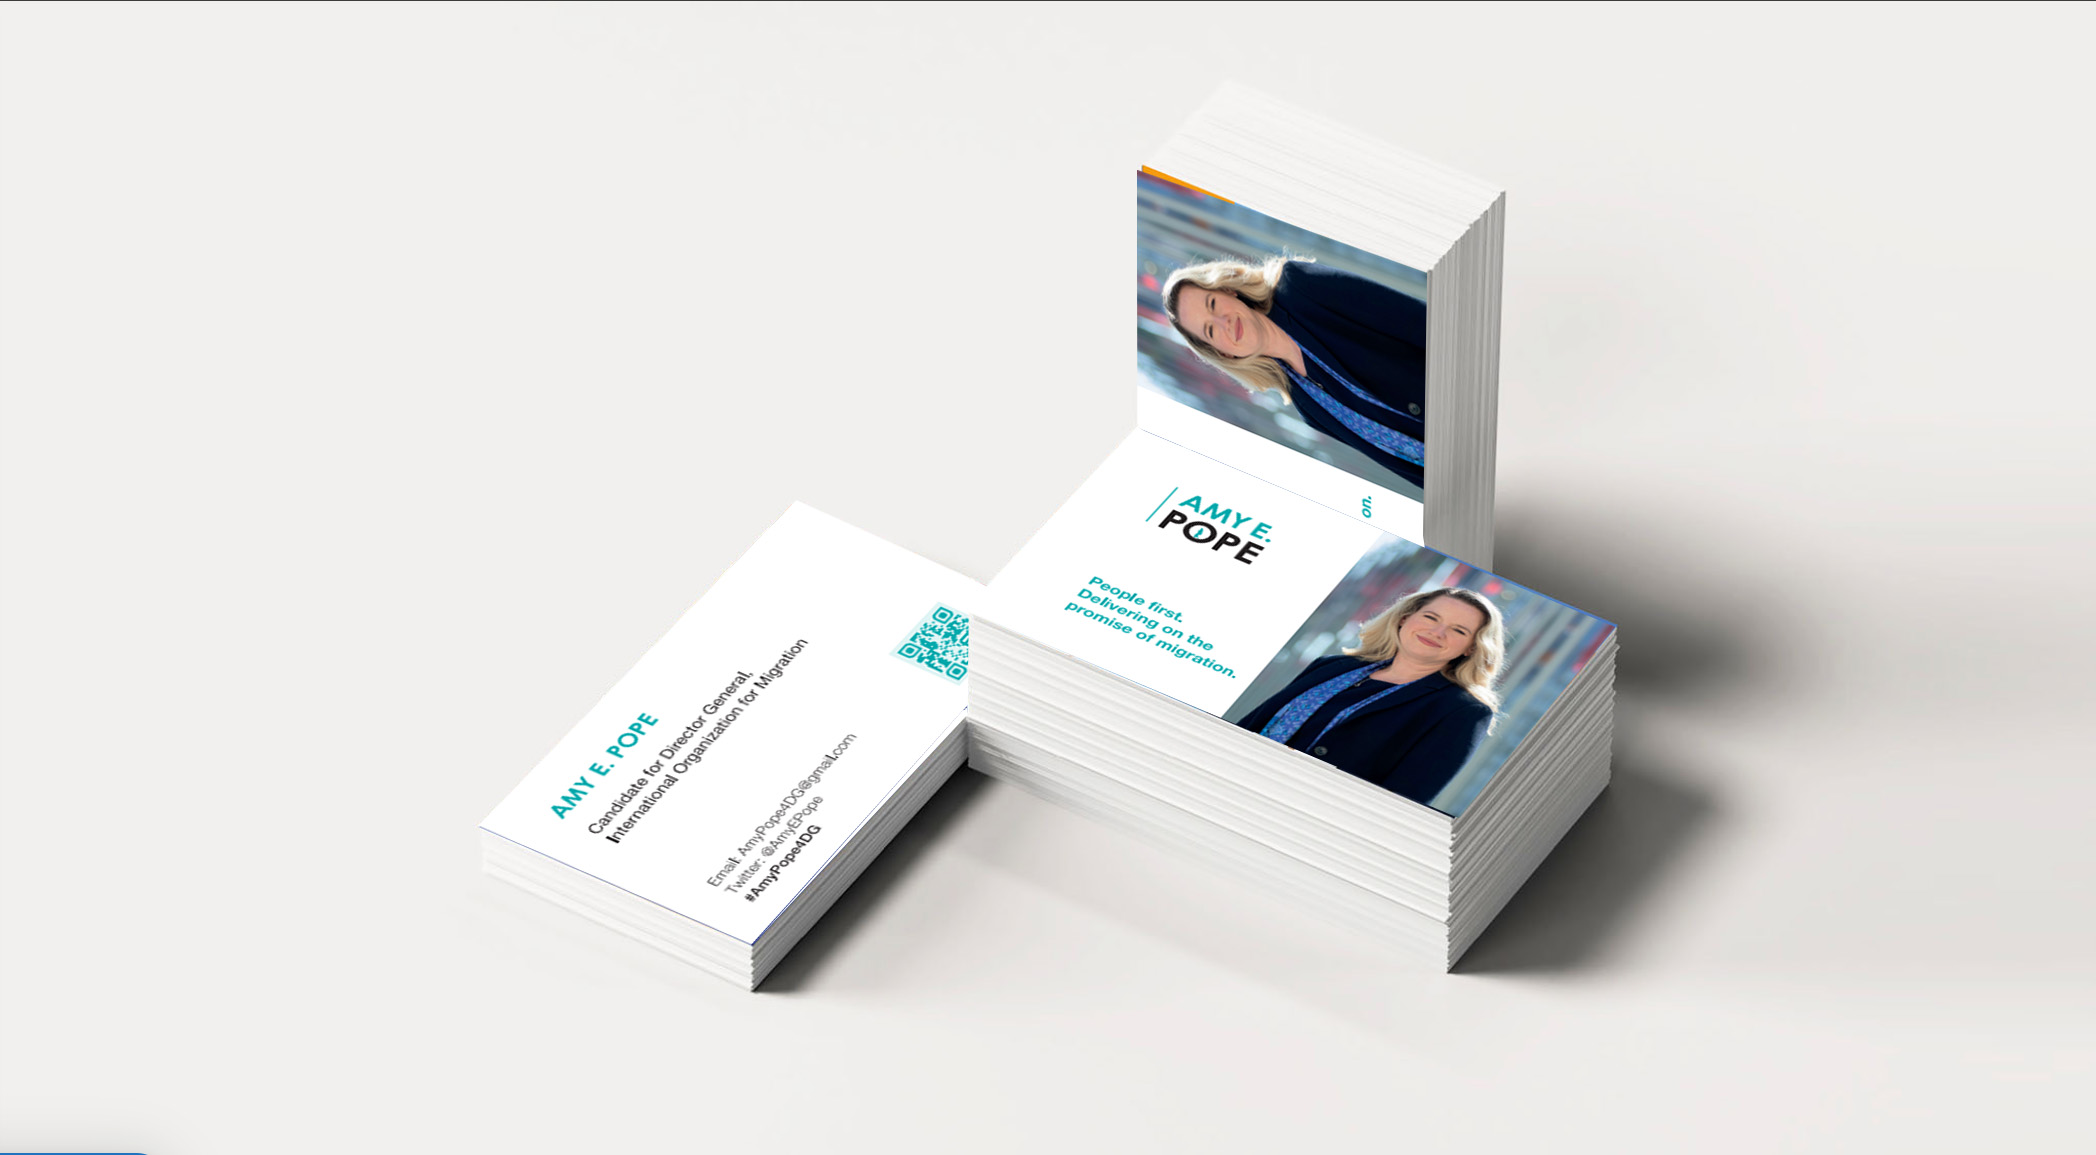 Image of business cards created by SmartCuts Creative Agency in Lausanne and Geneva